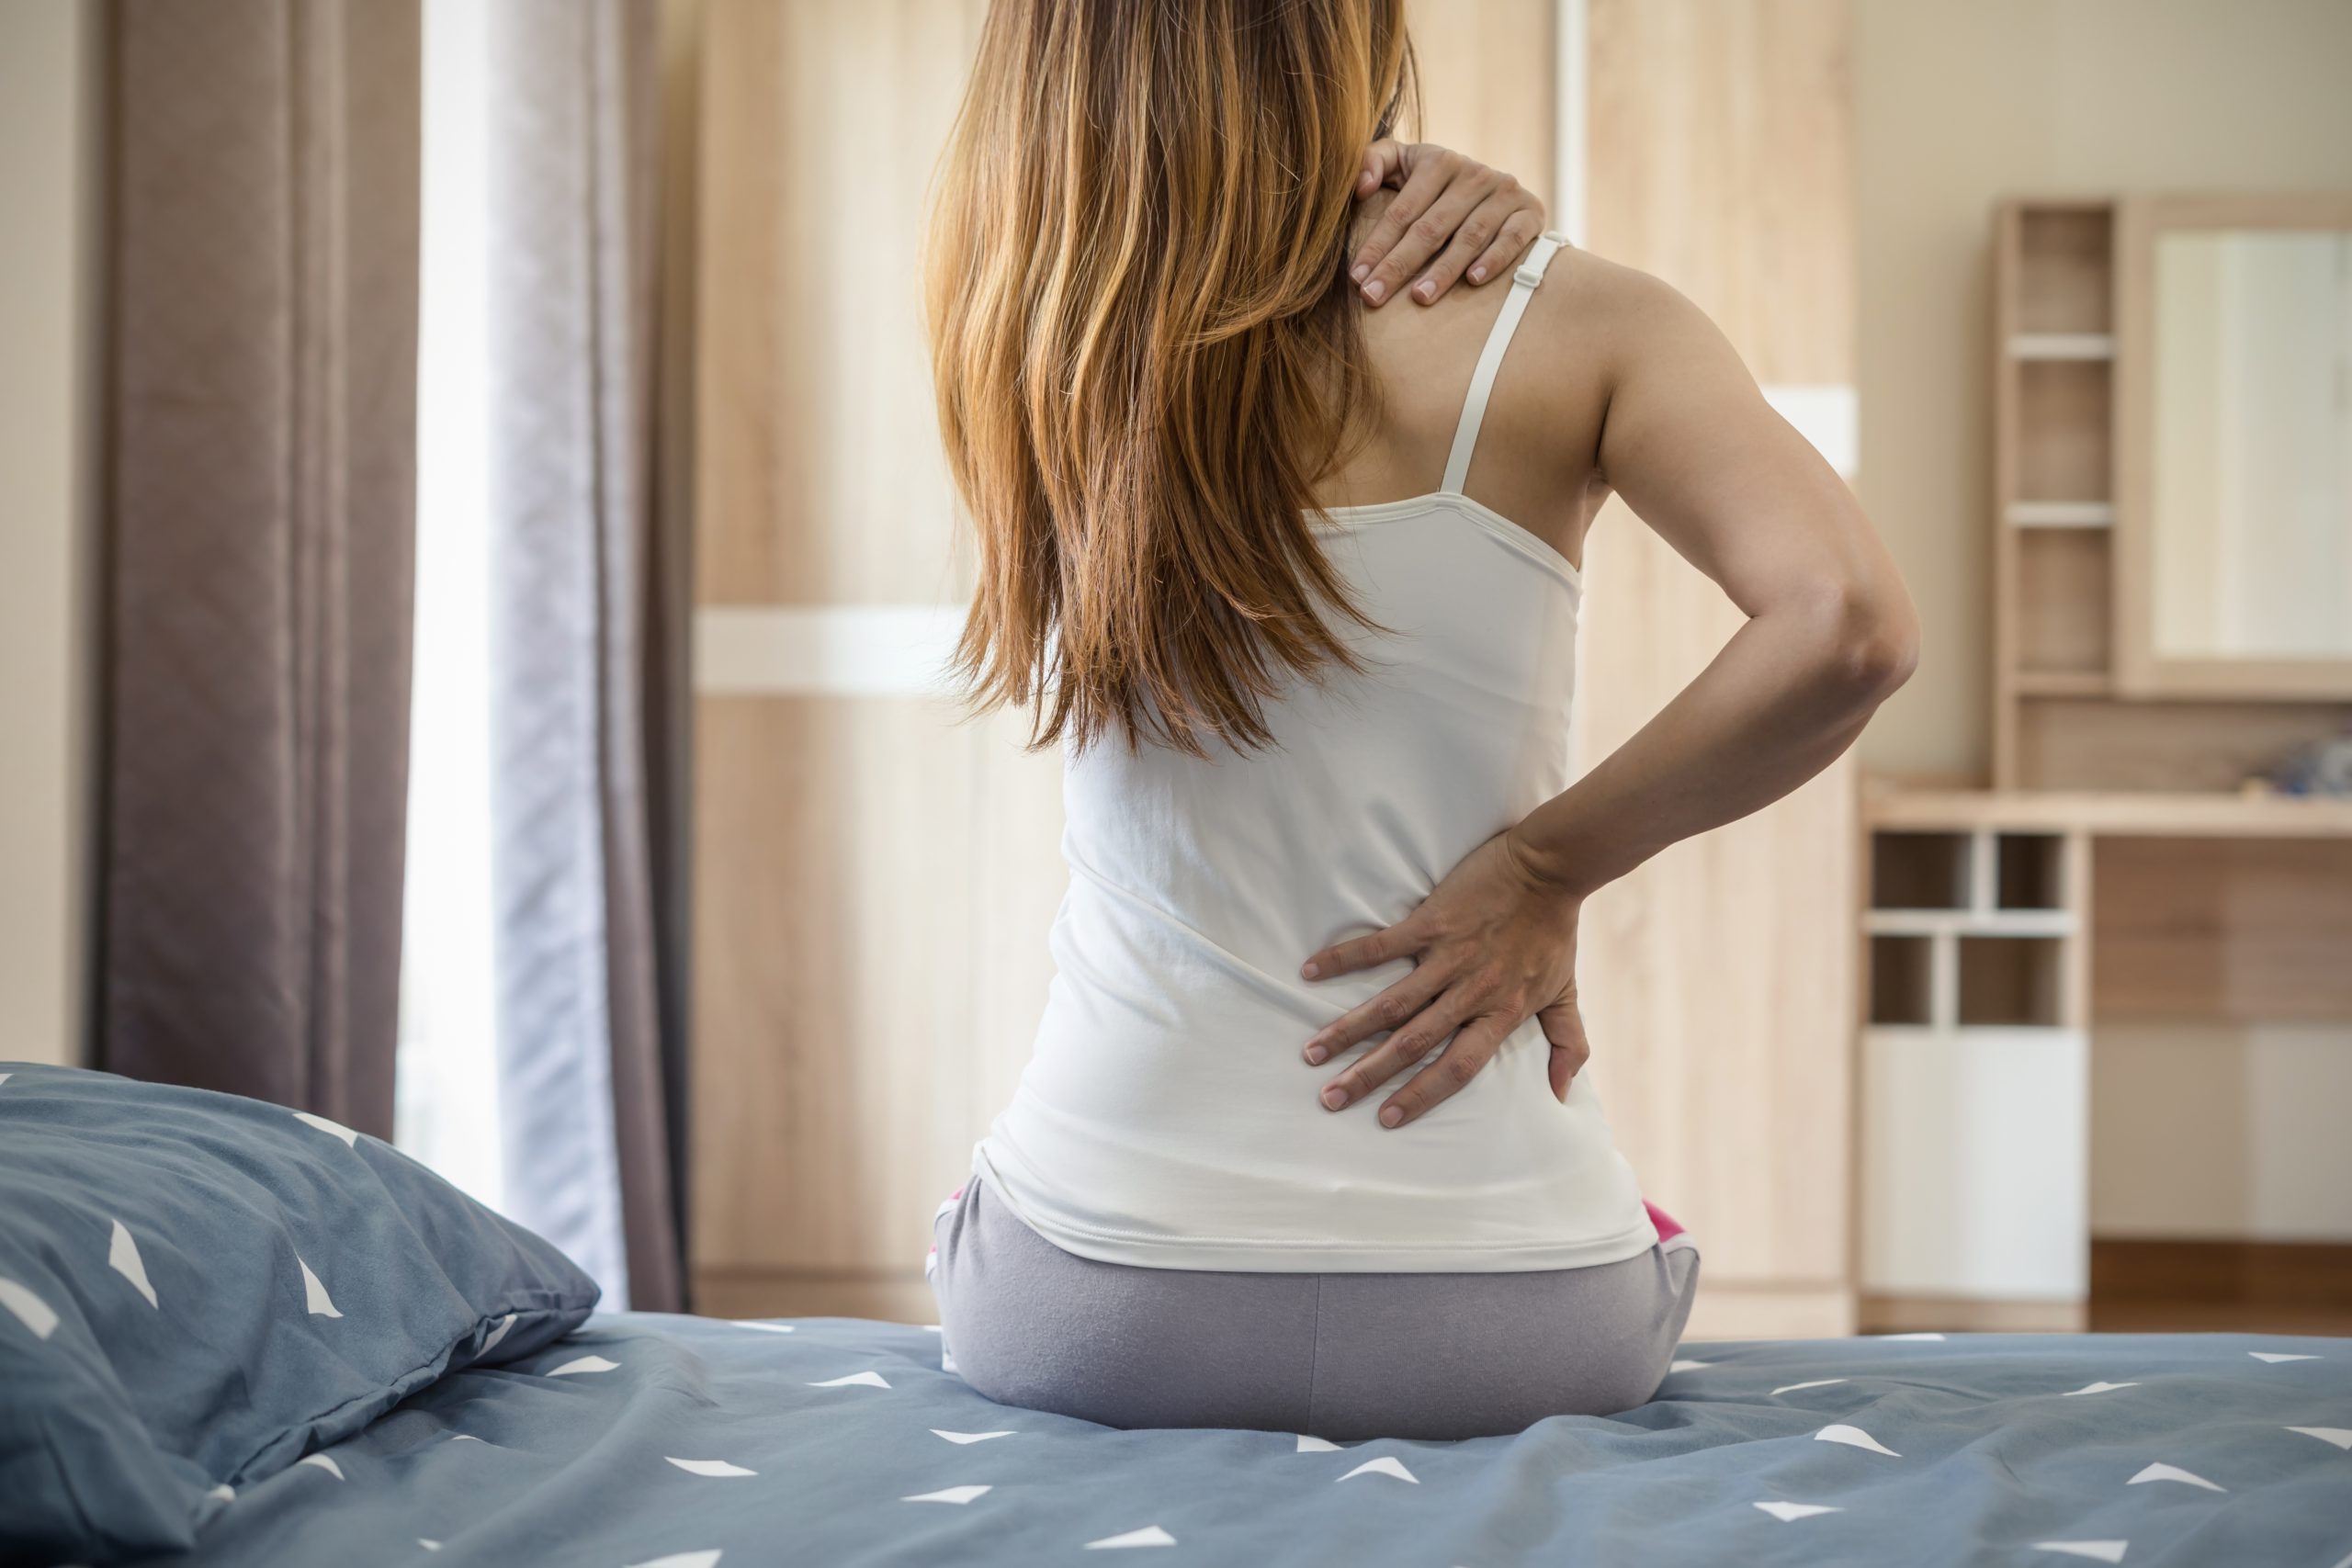 Physiotherapy can be a very effective treatment for lower back pain